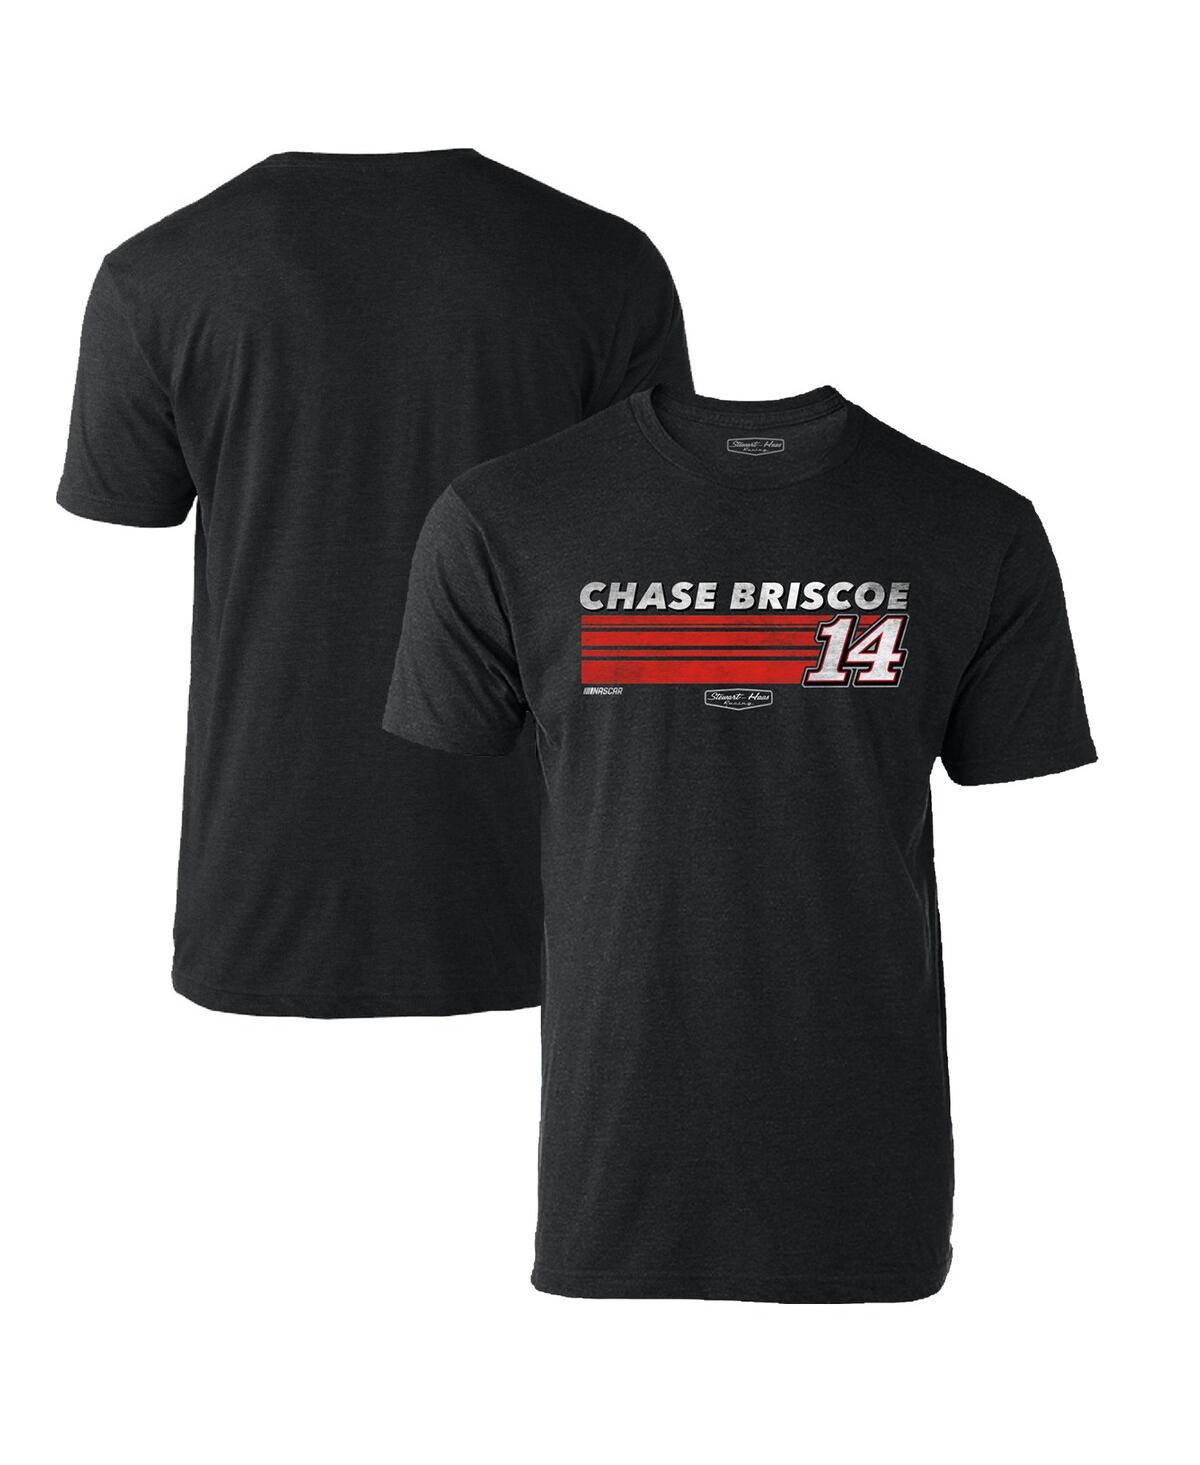 Men's Stewart-Haas Racing Team Collection Heather Charcoal Chase Briscoe Hot Lap T-shirt - Heather Charcoal